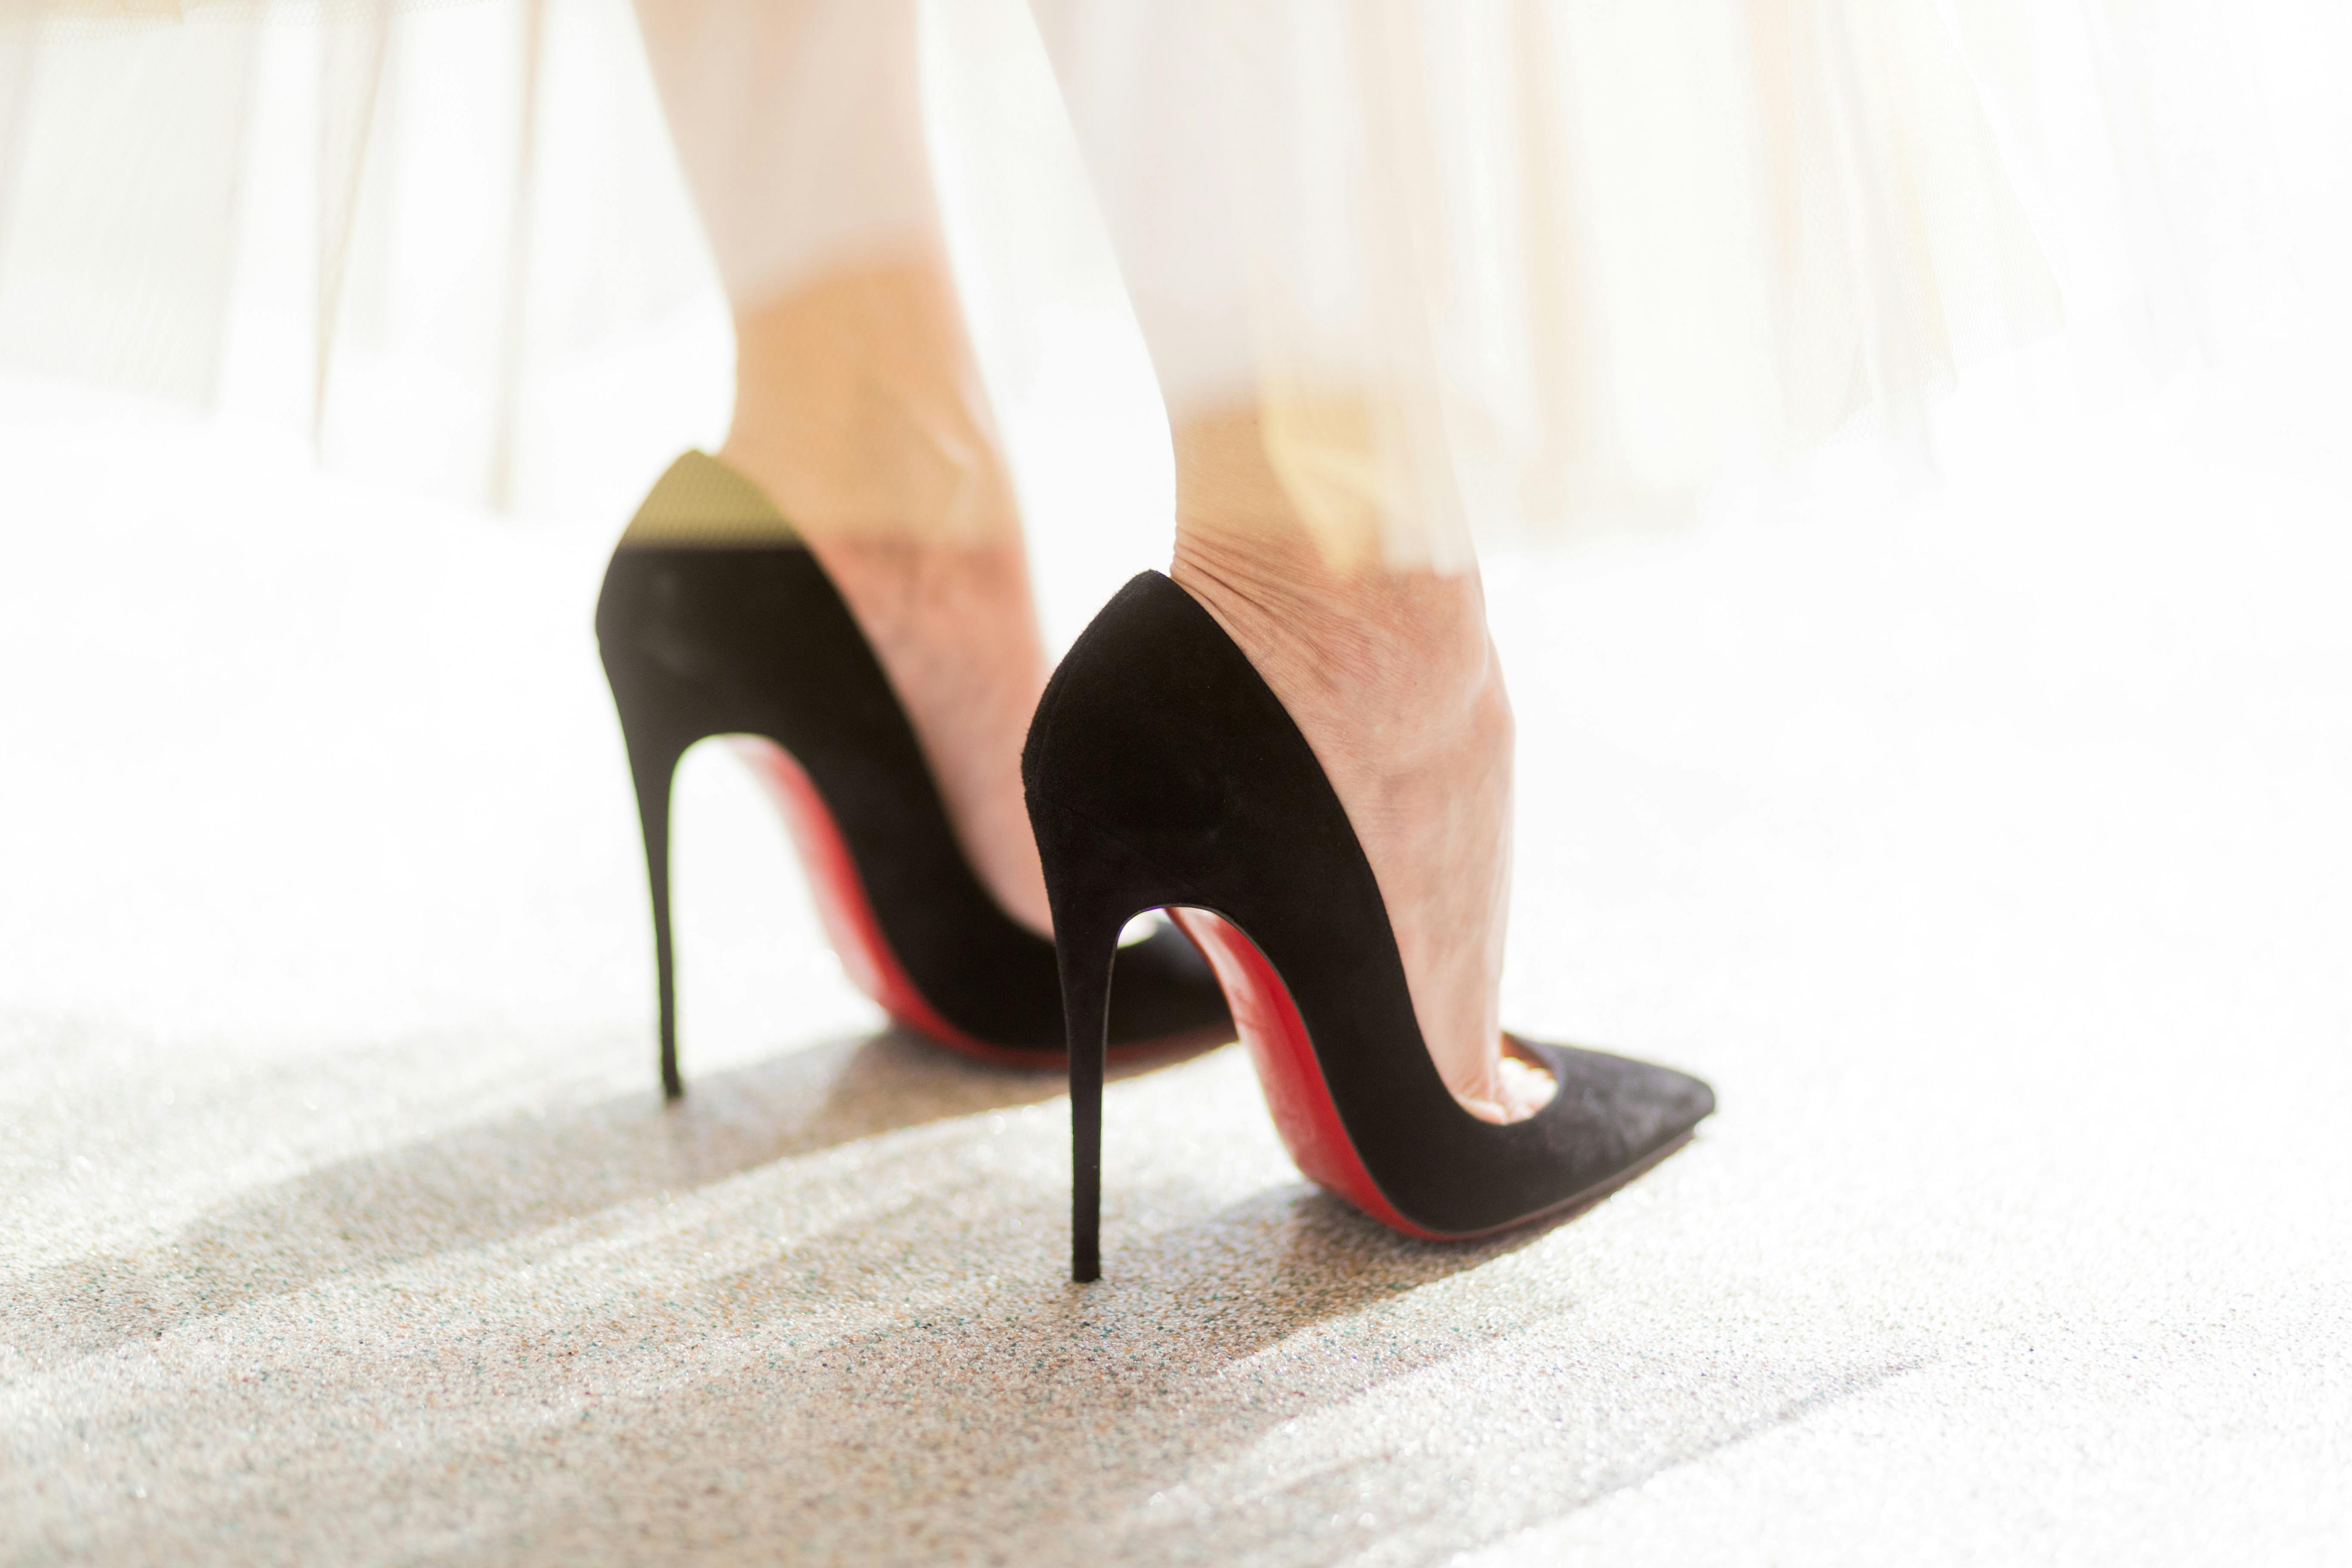 Christian Louboutin: The Man with the Red Sole